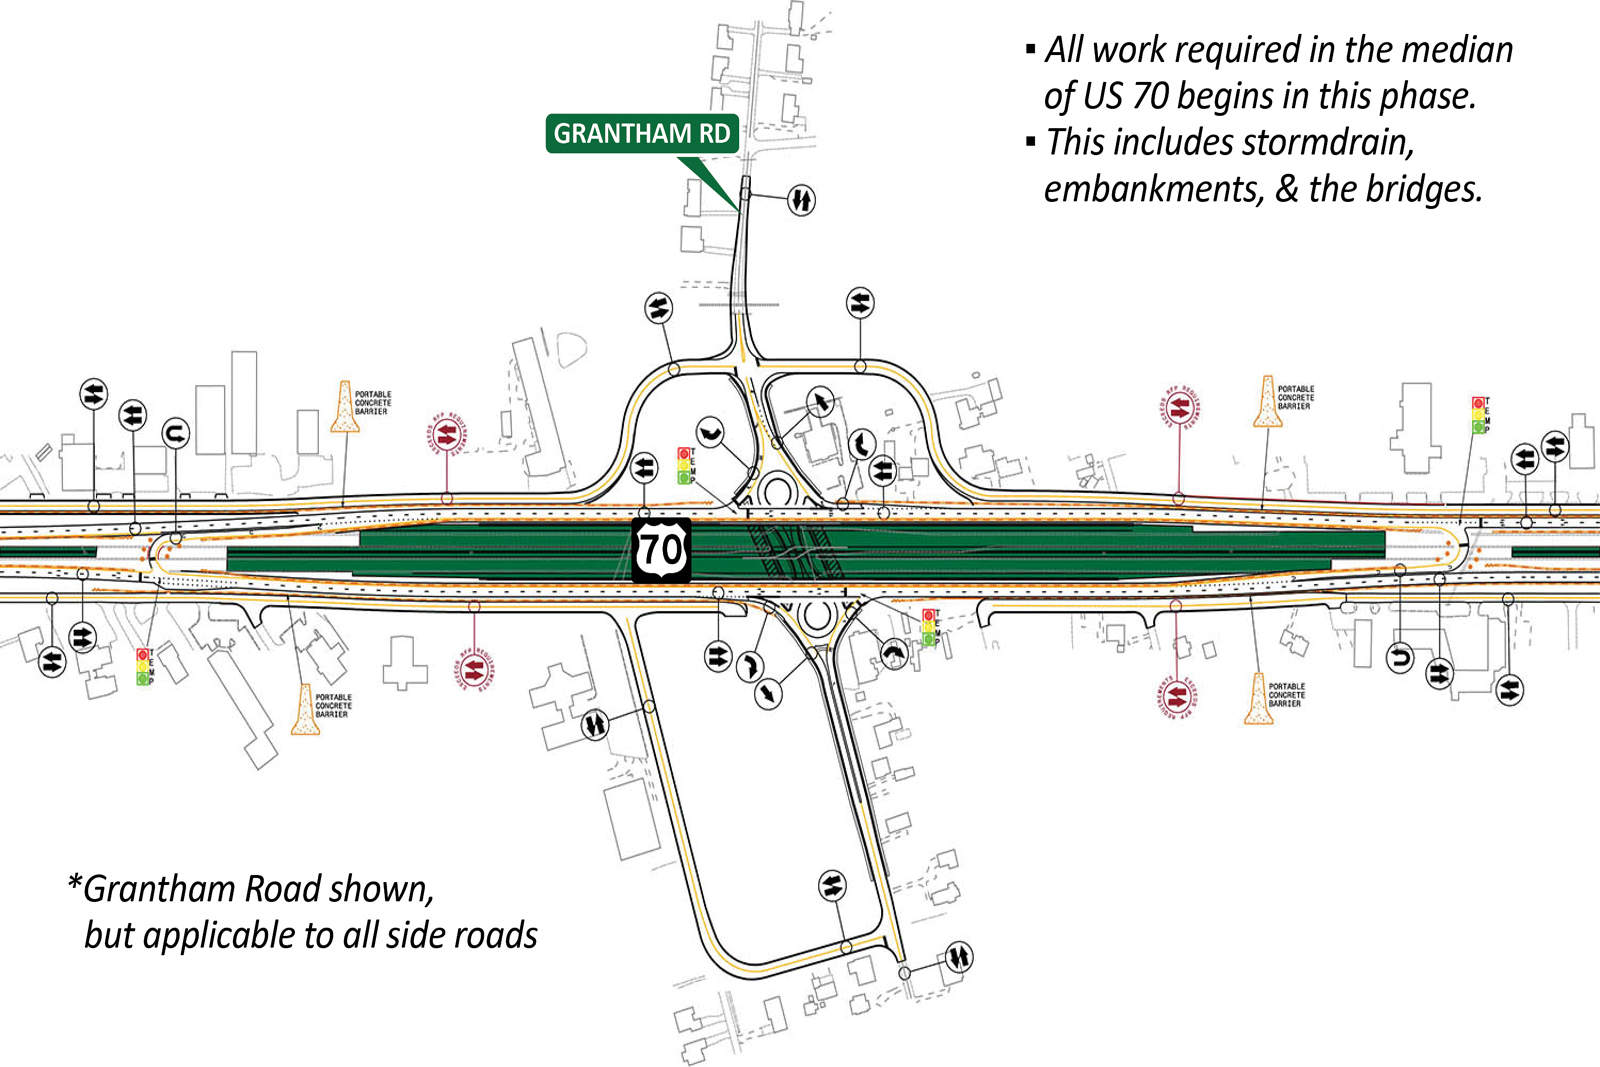 Construction Step 5: Work on the new U.S. 70 lanes begins